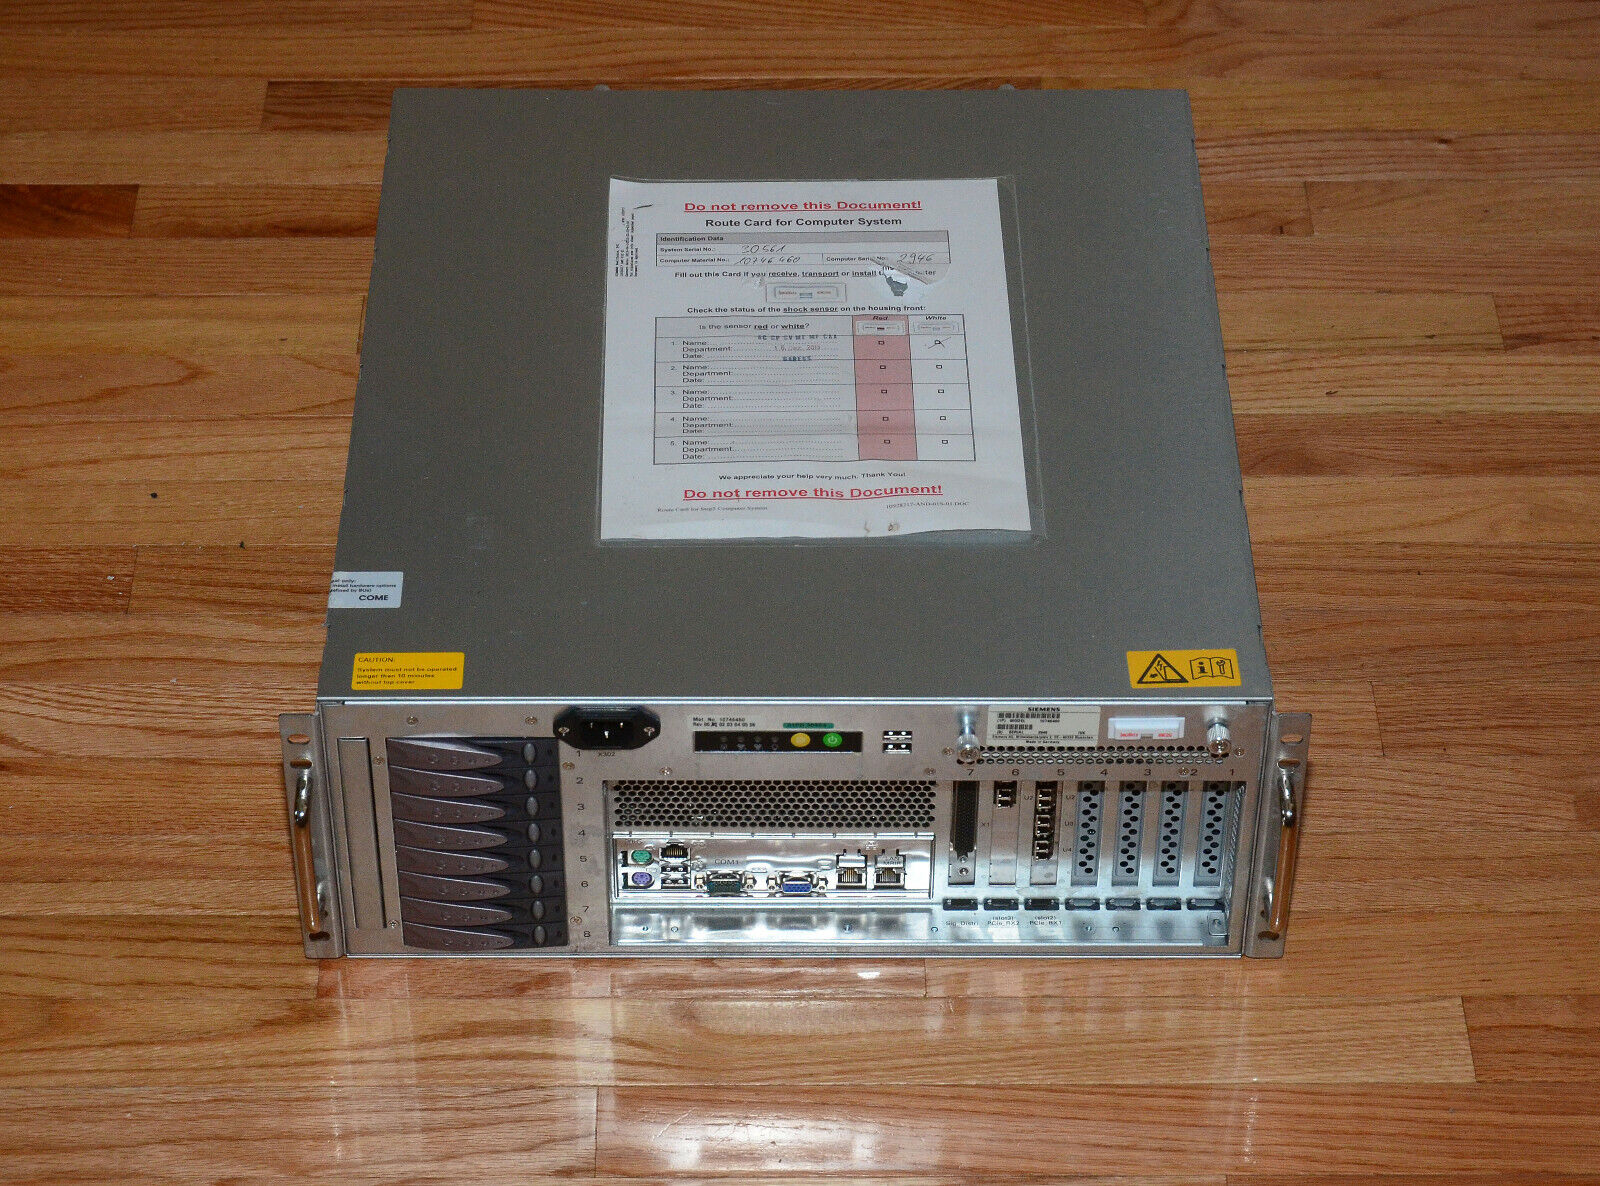 Siemens Server Computer 10746460 - With 10500992, 10500993 PCIe Cards